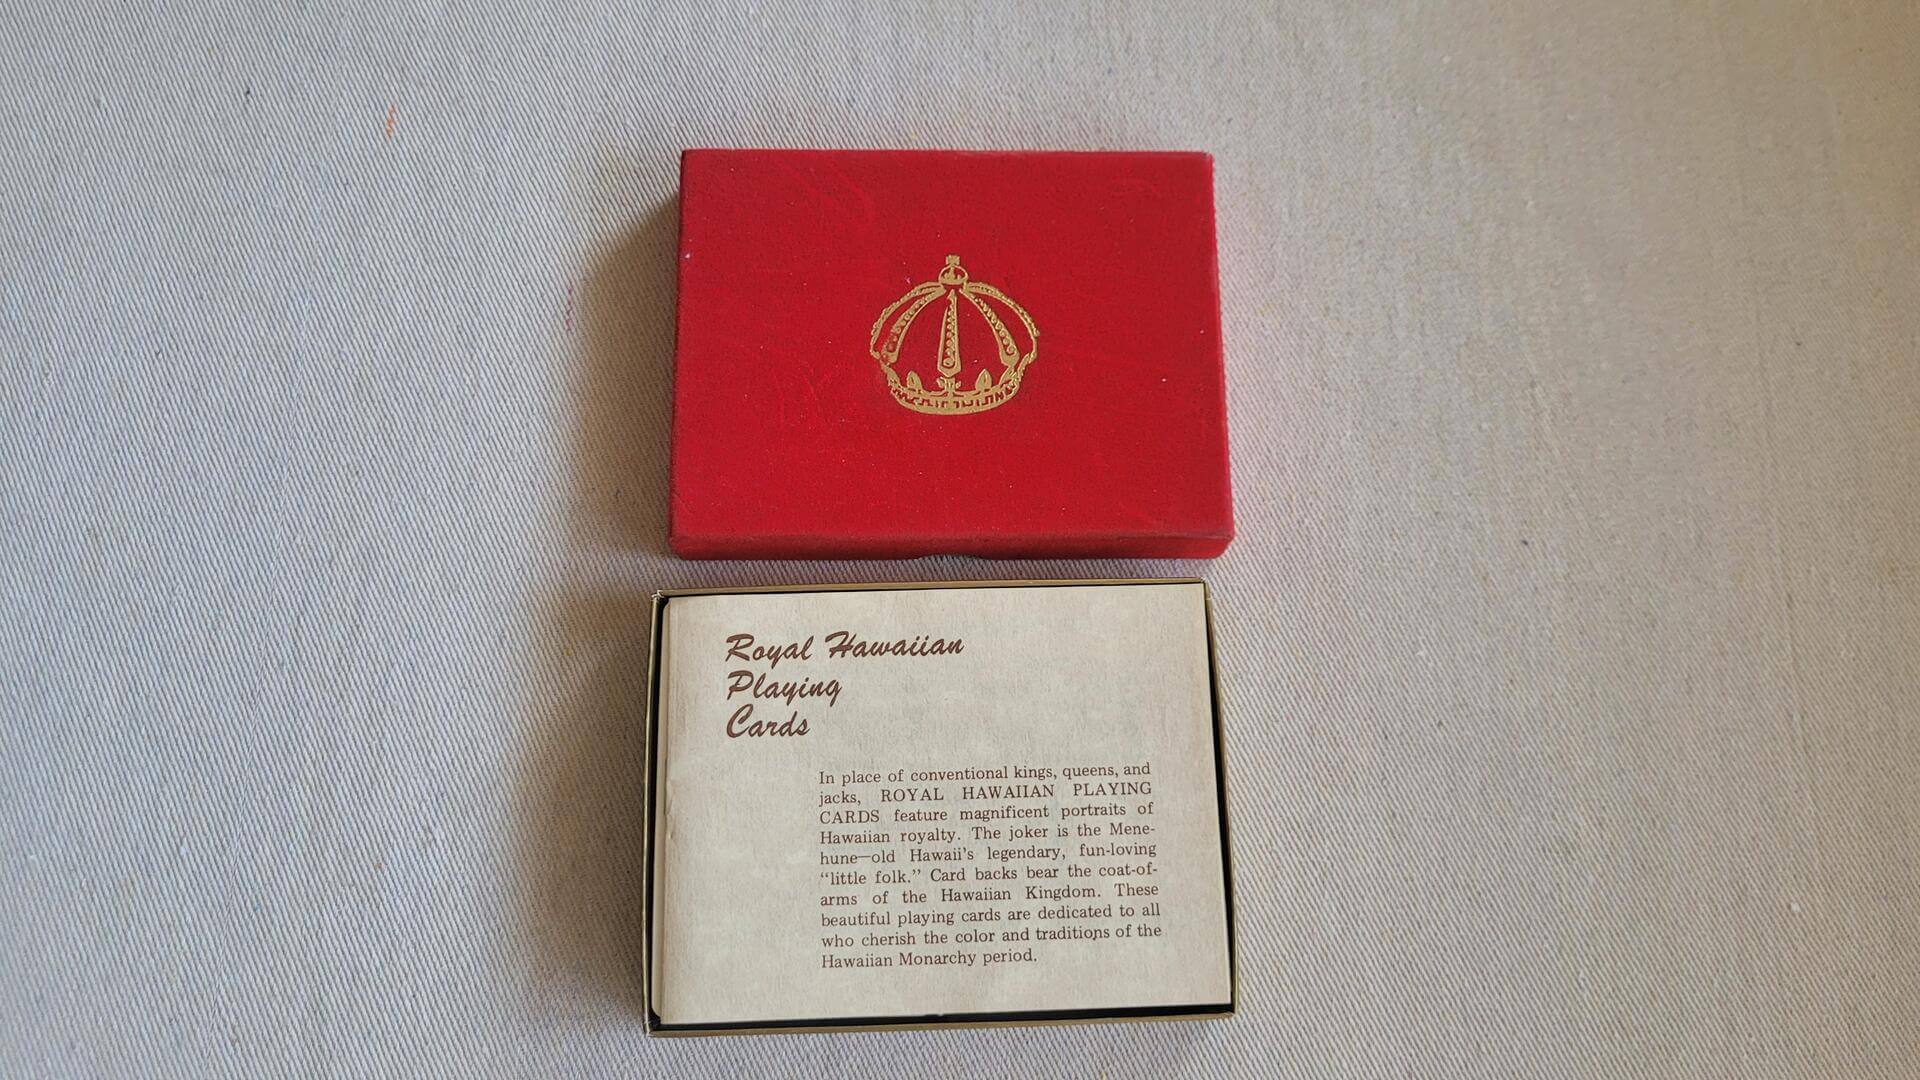 Rare vintage Royal Hawaiian playing cards double deck Hawaiian Monarchy Period, 1795-1893. Rare complete set retro 1970s made in USA collectible card games